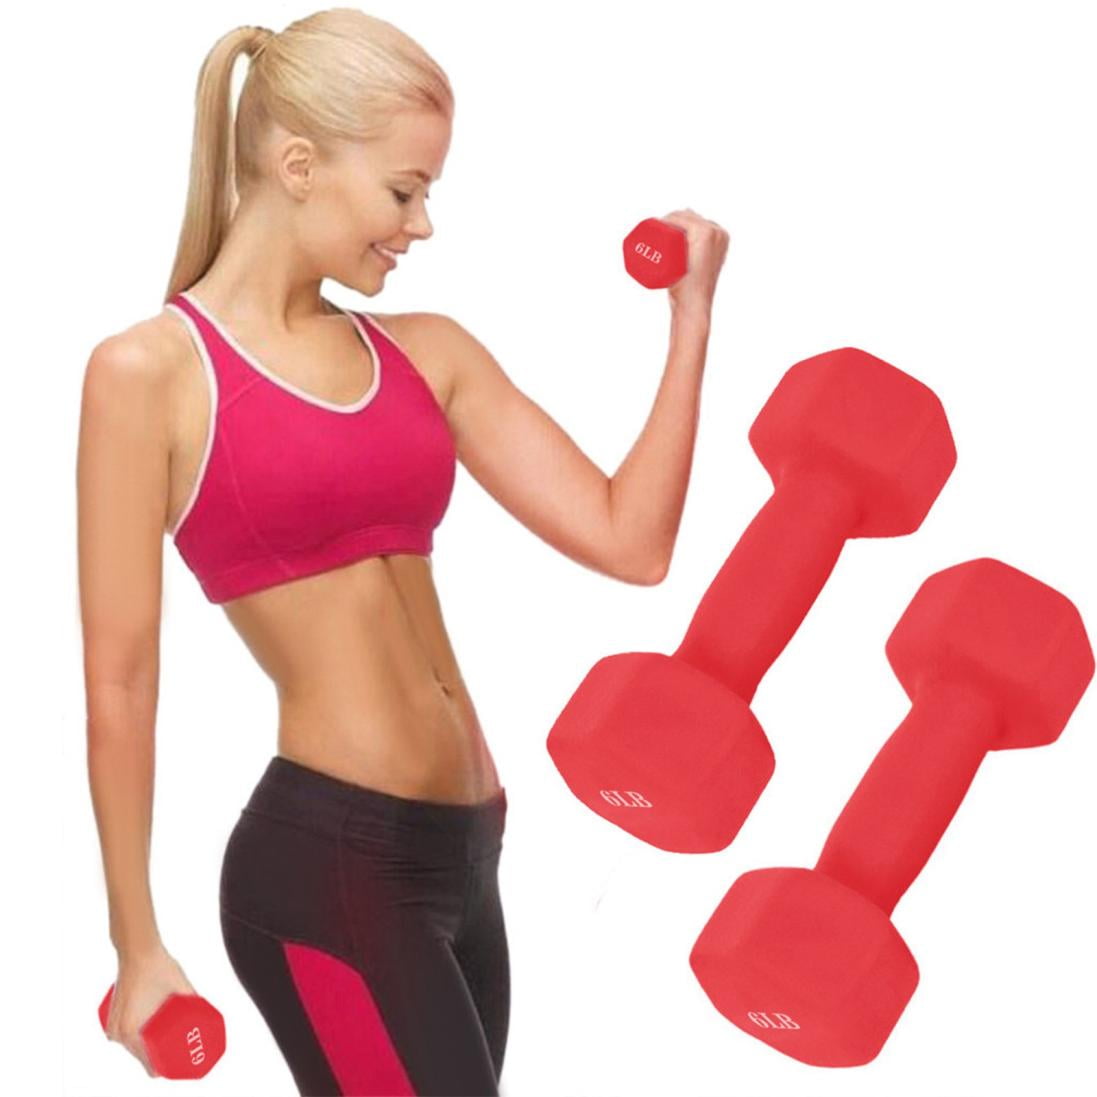 Details about   IN STOCK Neoprene Hex Dumbbells 6 8 10 12 15 lb Weight Home Workout Brand New 